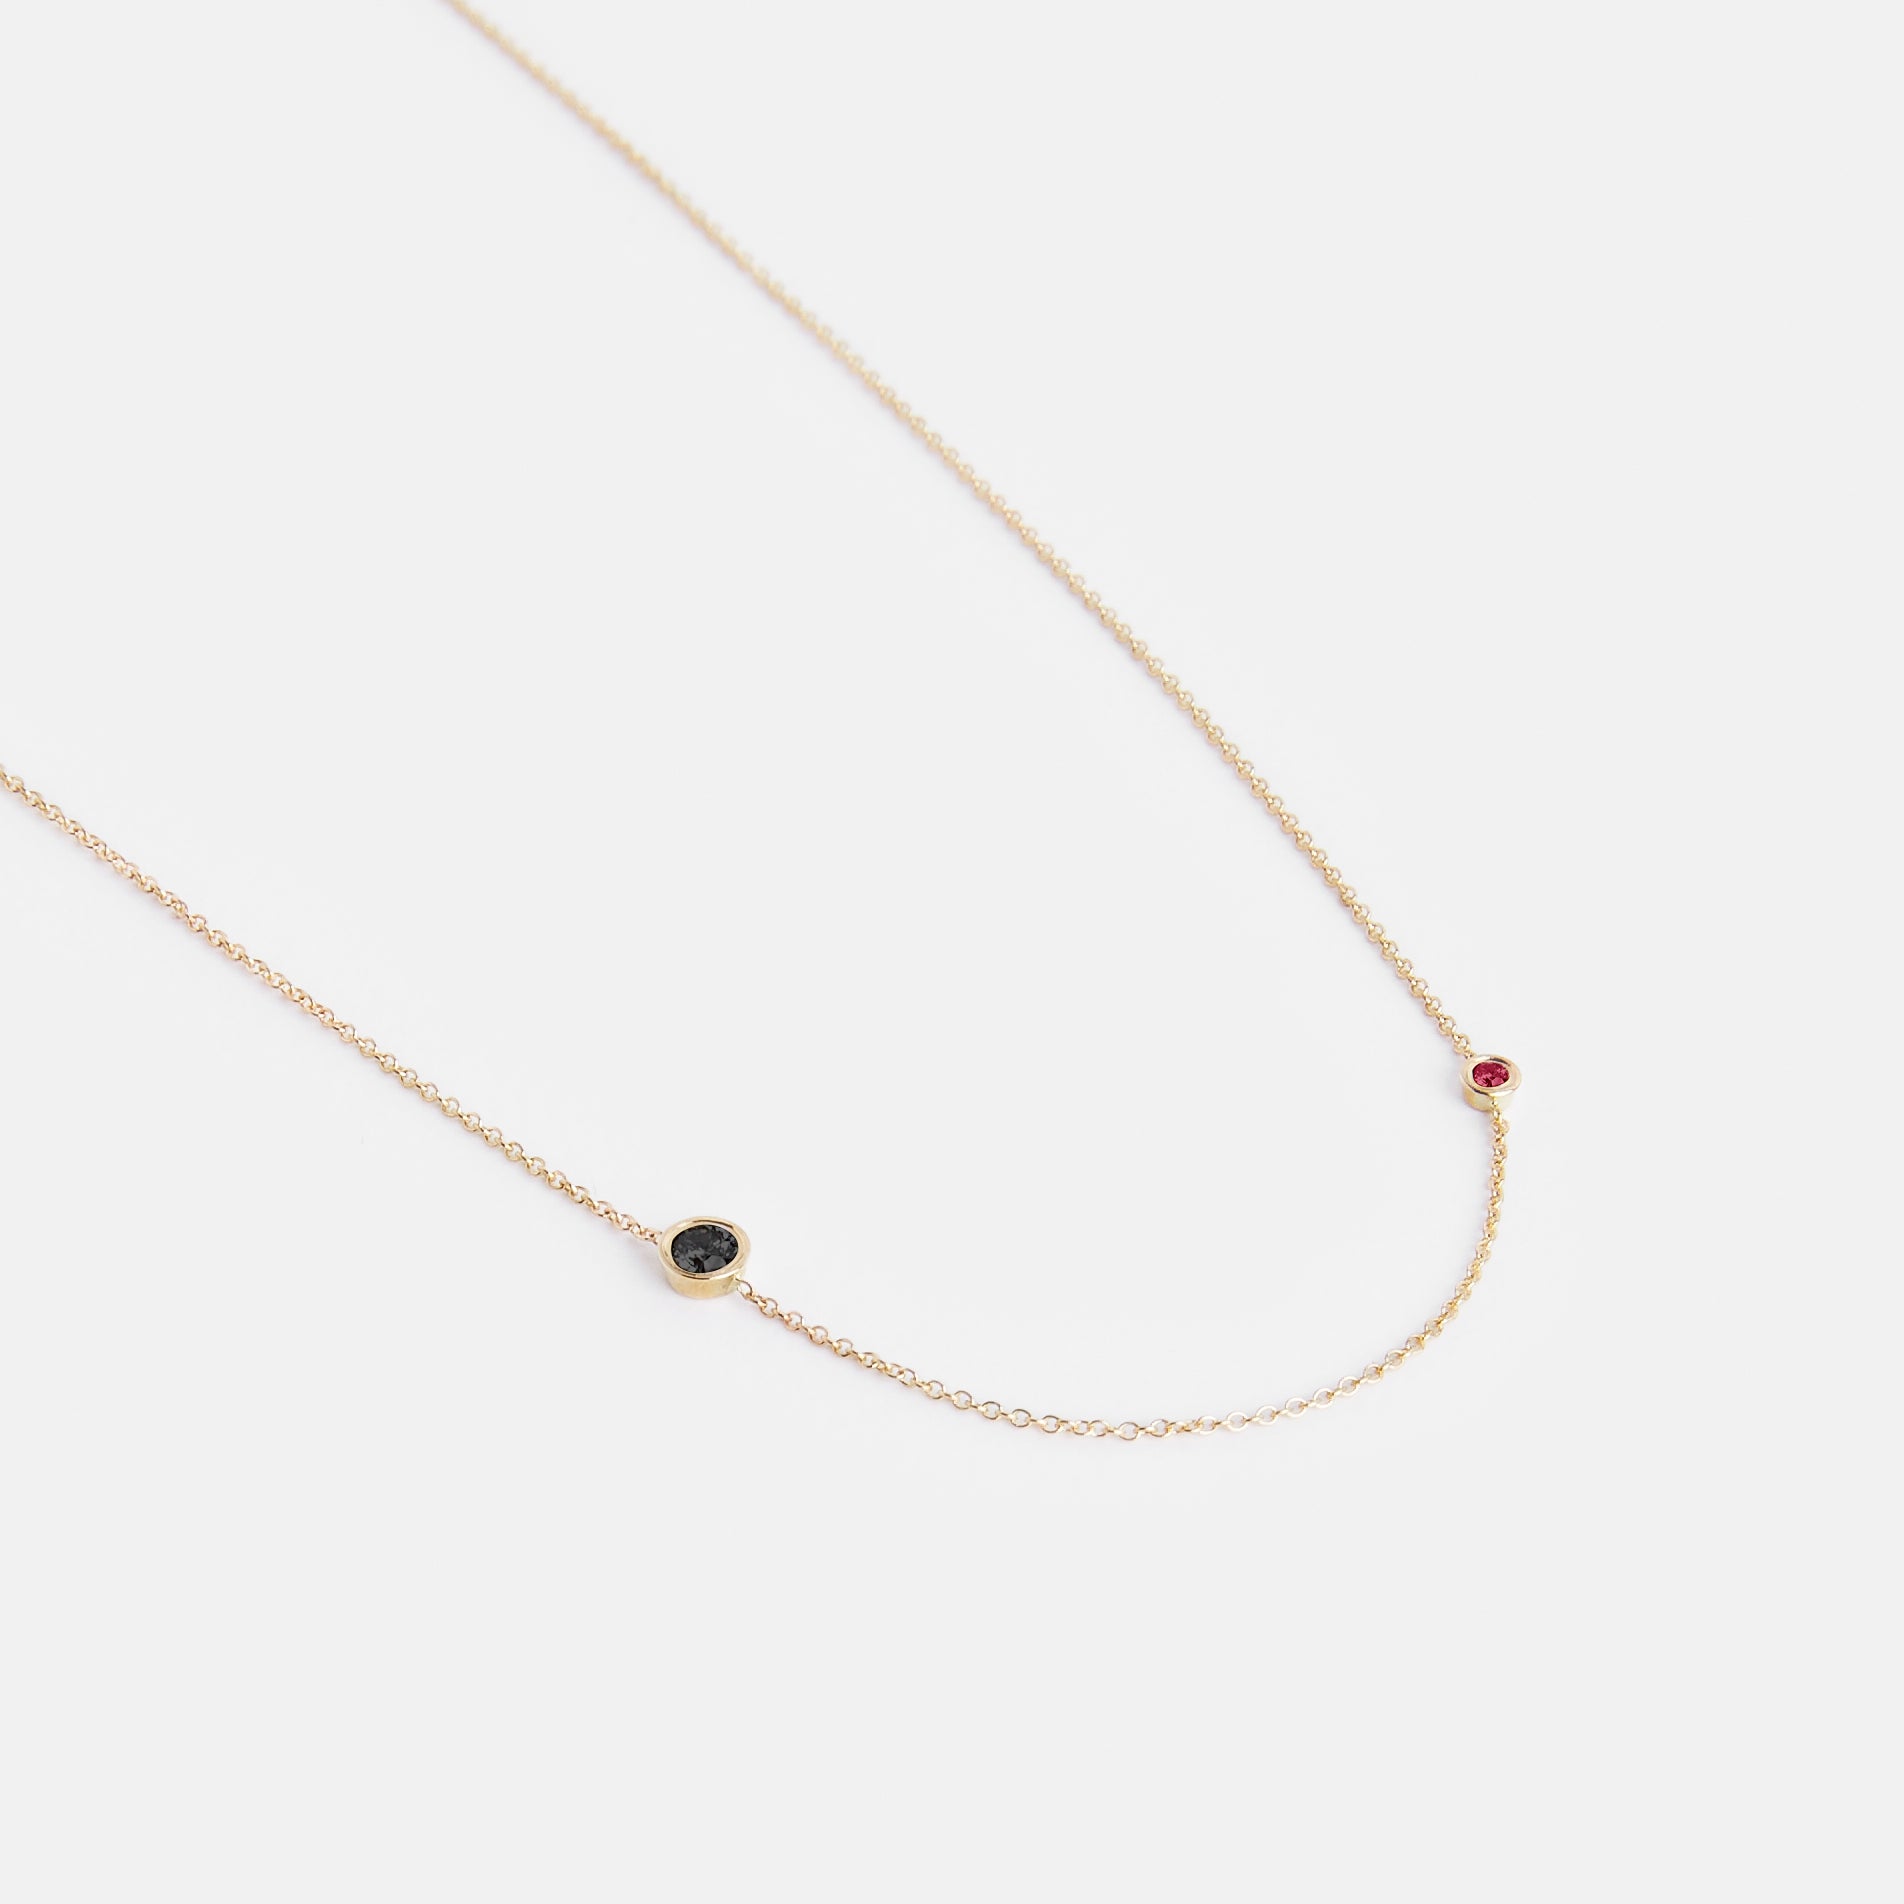 Iba Simple Necklace in 14k Gold set with Black Diamond and Ruby By SHW Fine Jewelry NYC